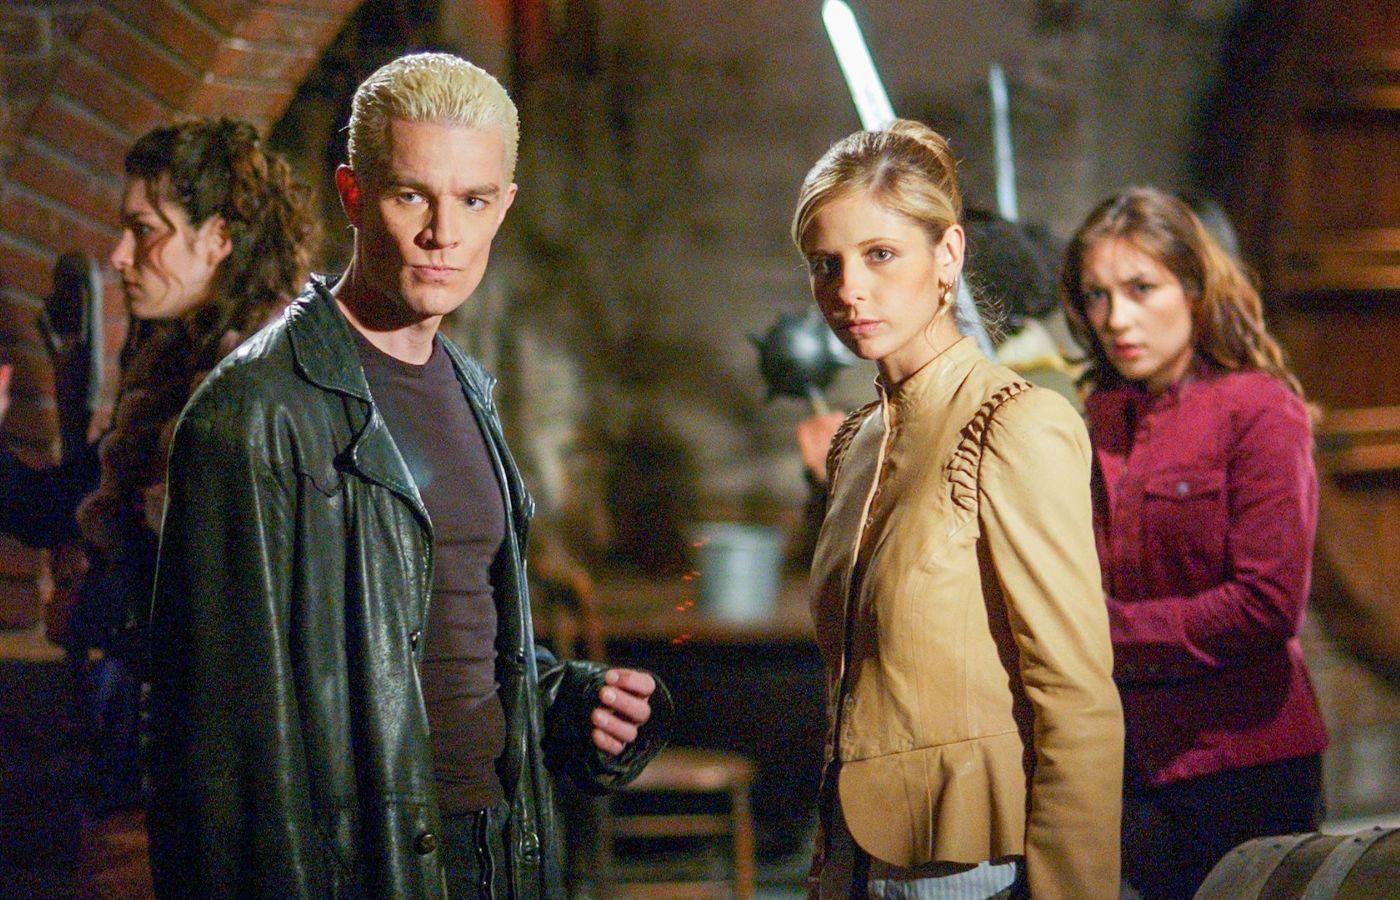 Buffy and Spike in Buffy the Vampire Slayer